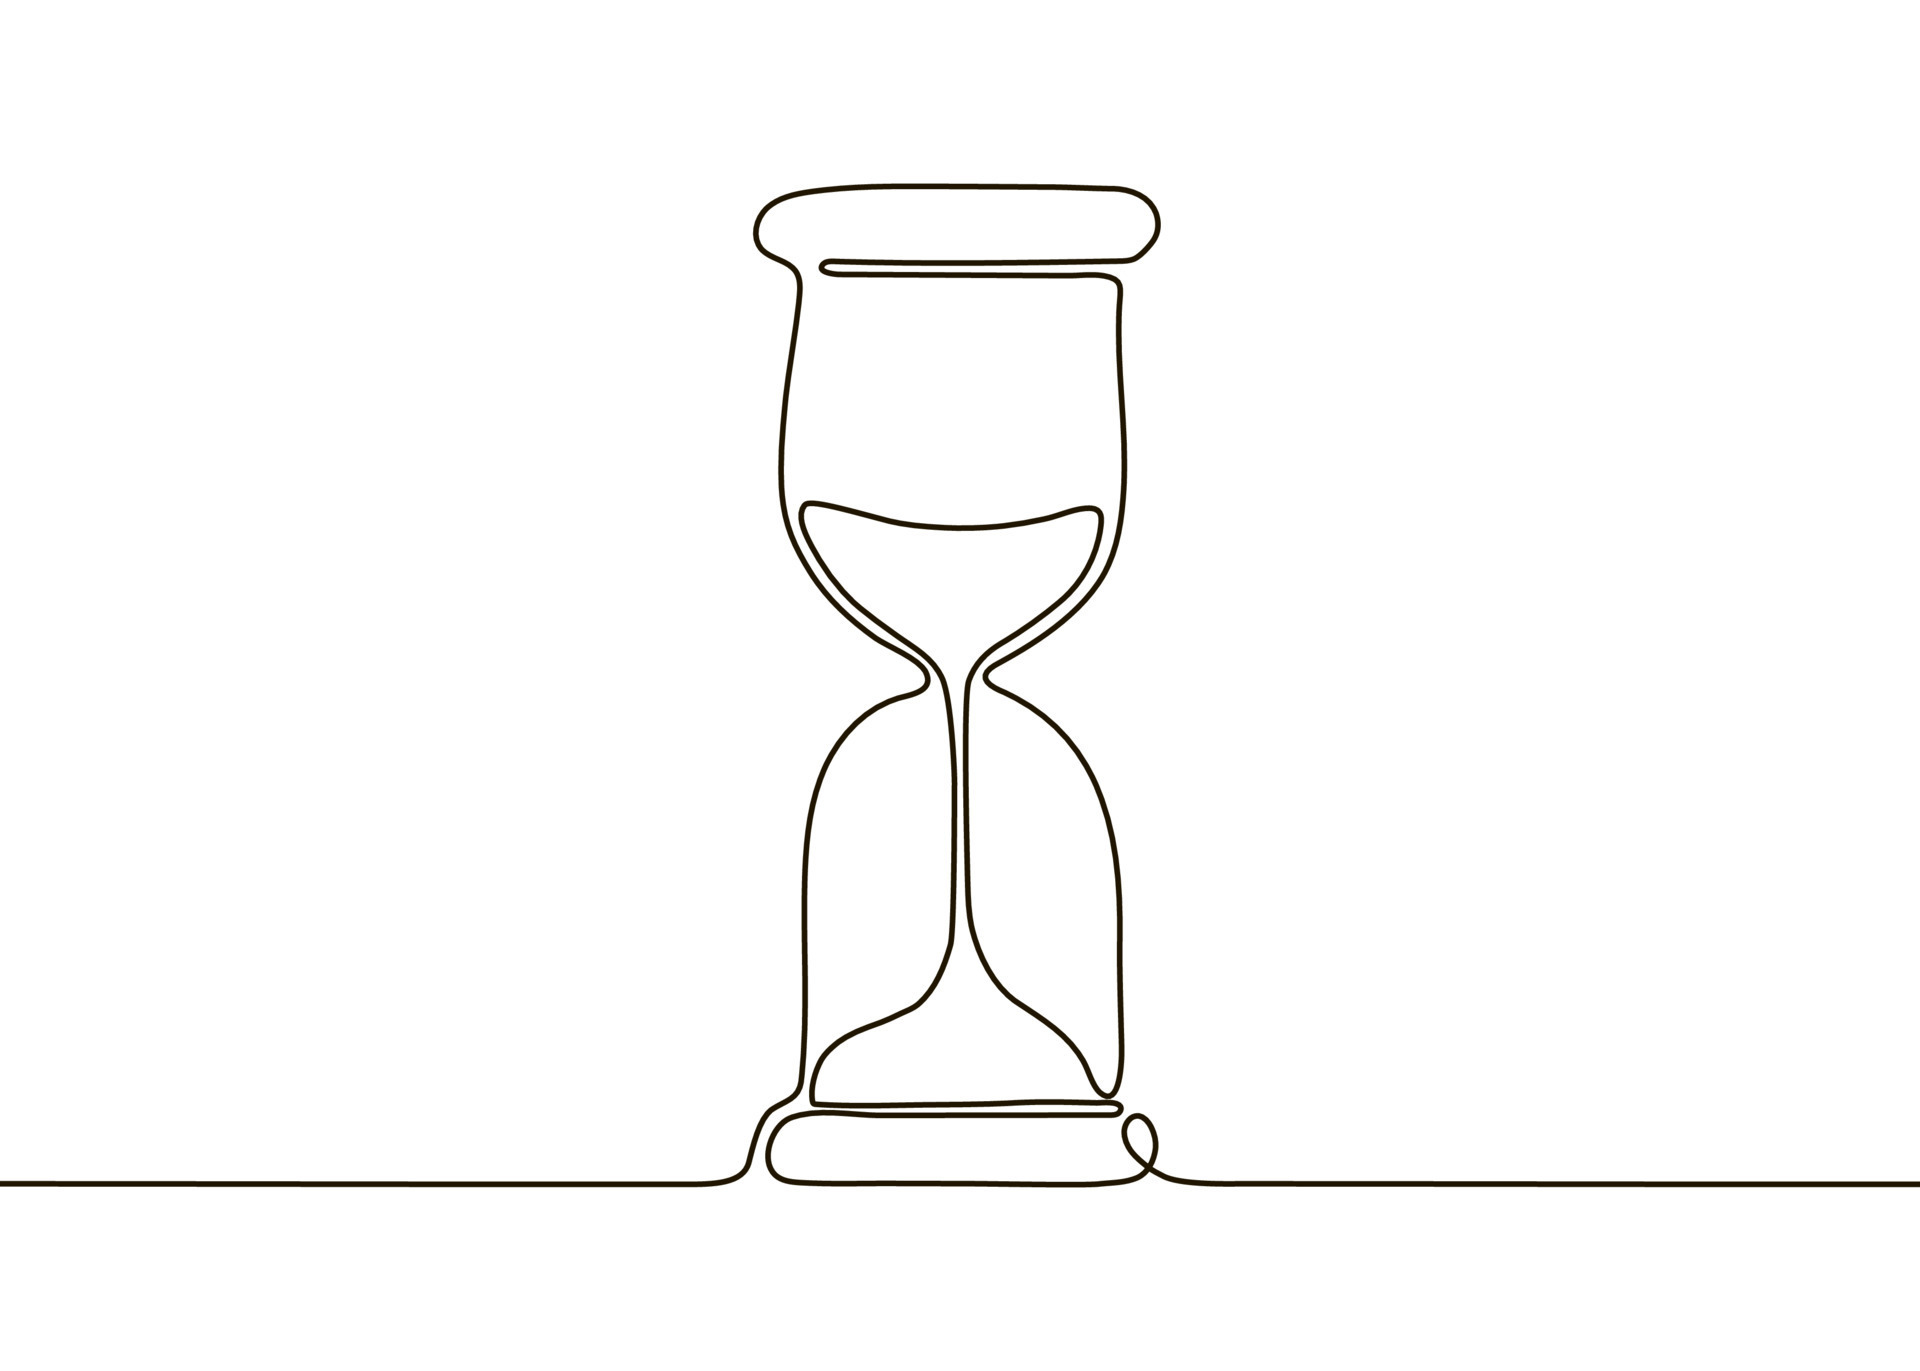 Hourglass Drawing  How To Draw An Hourglass Step By Step